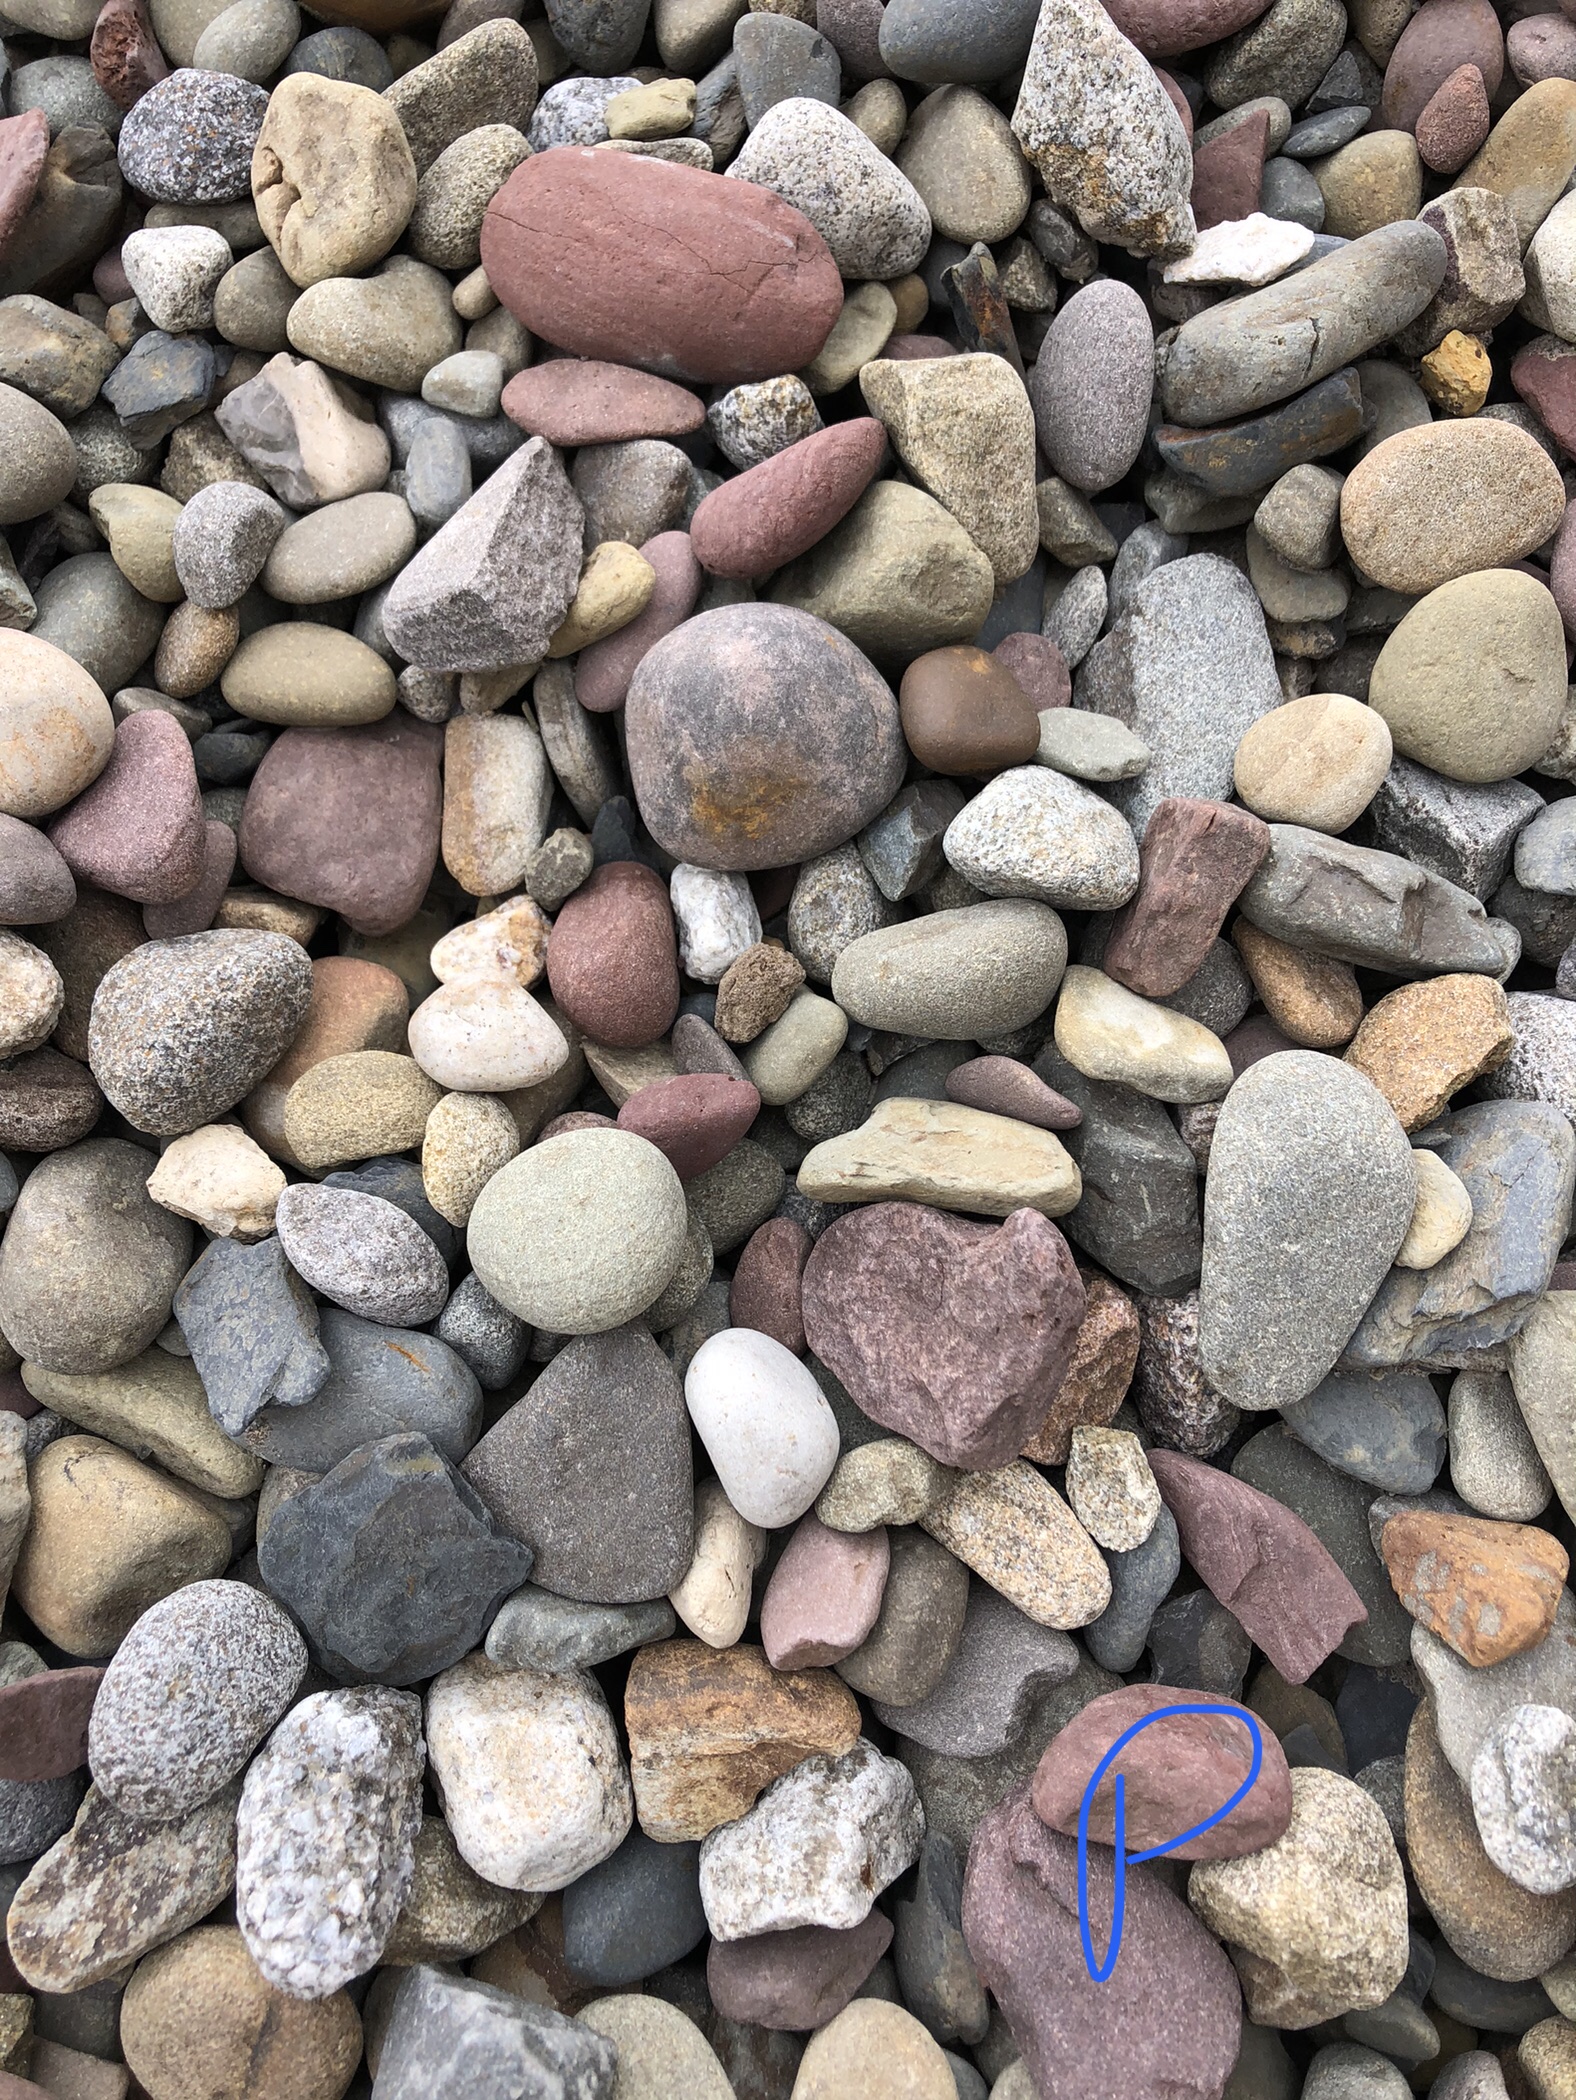 pile of various color pebbles called pocono stones.